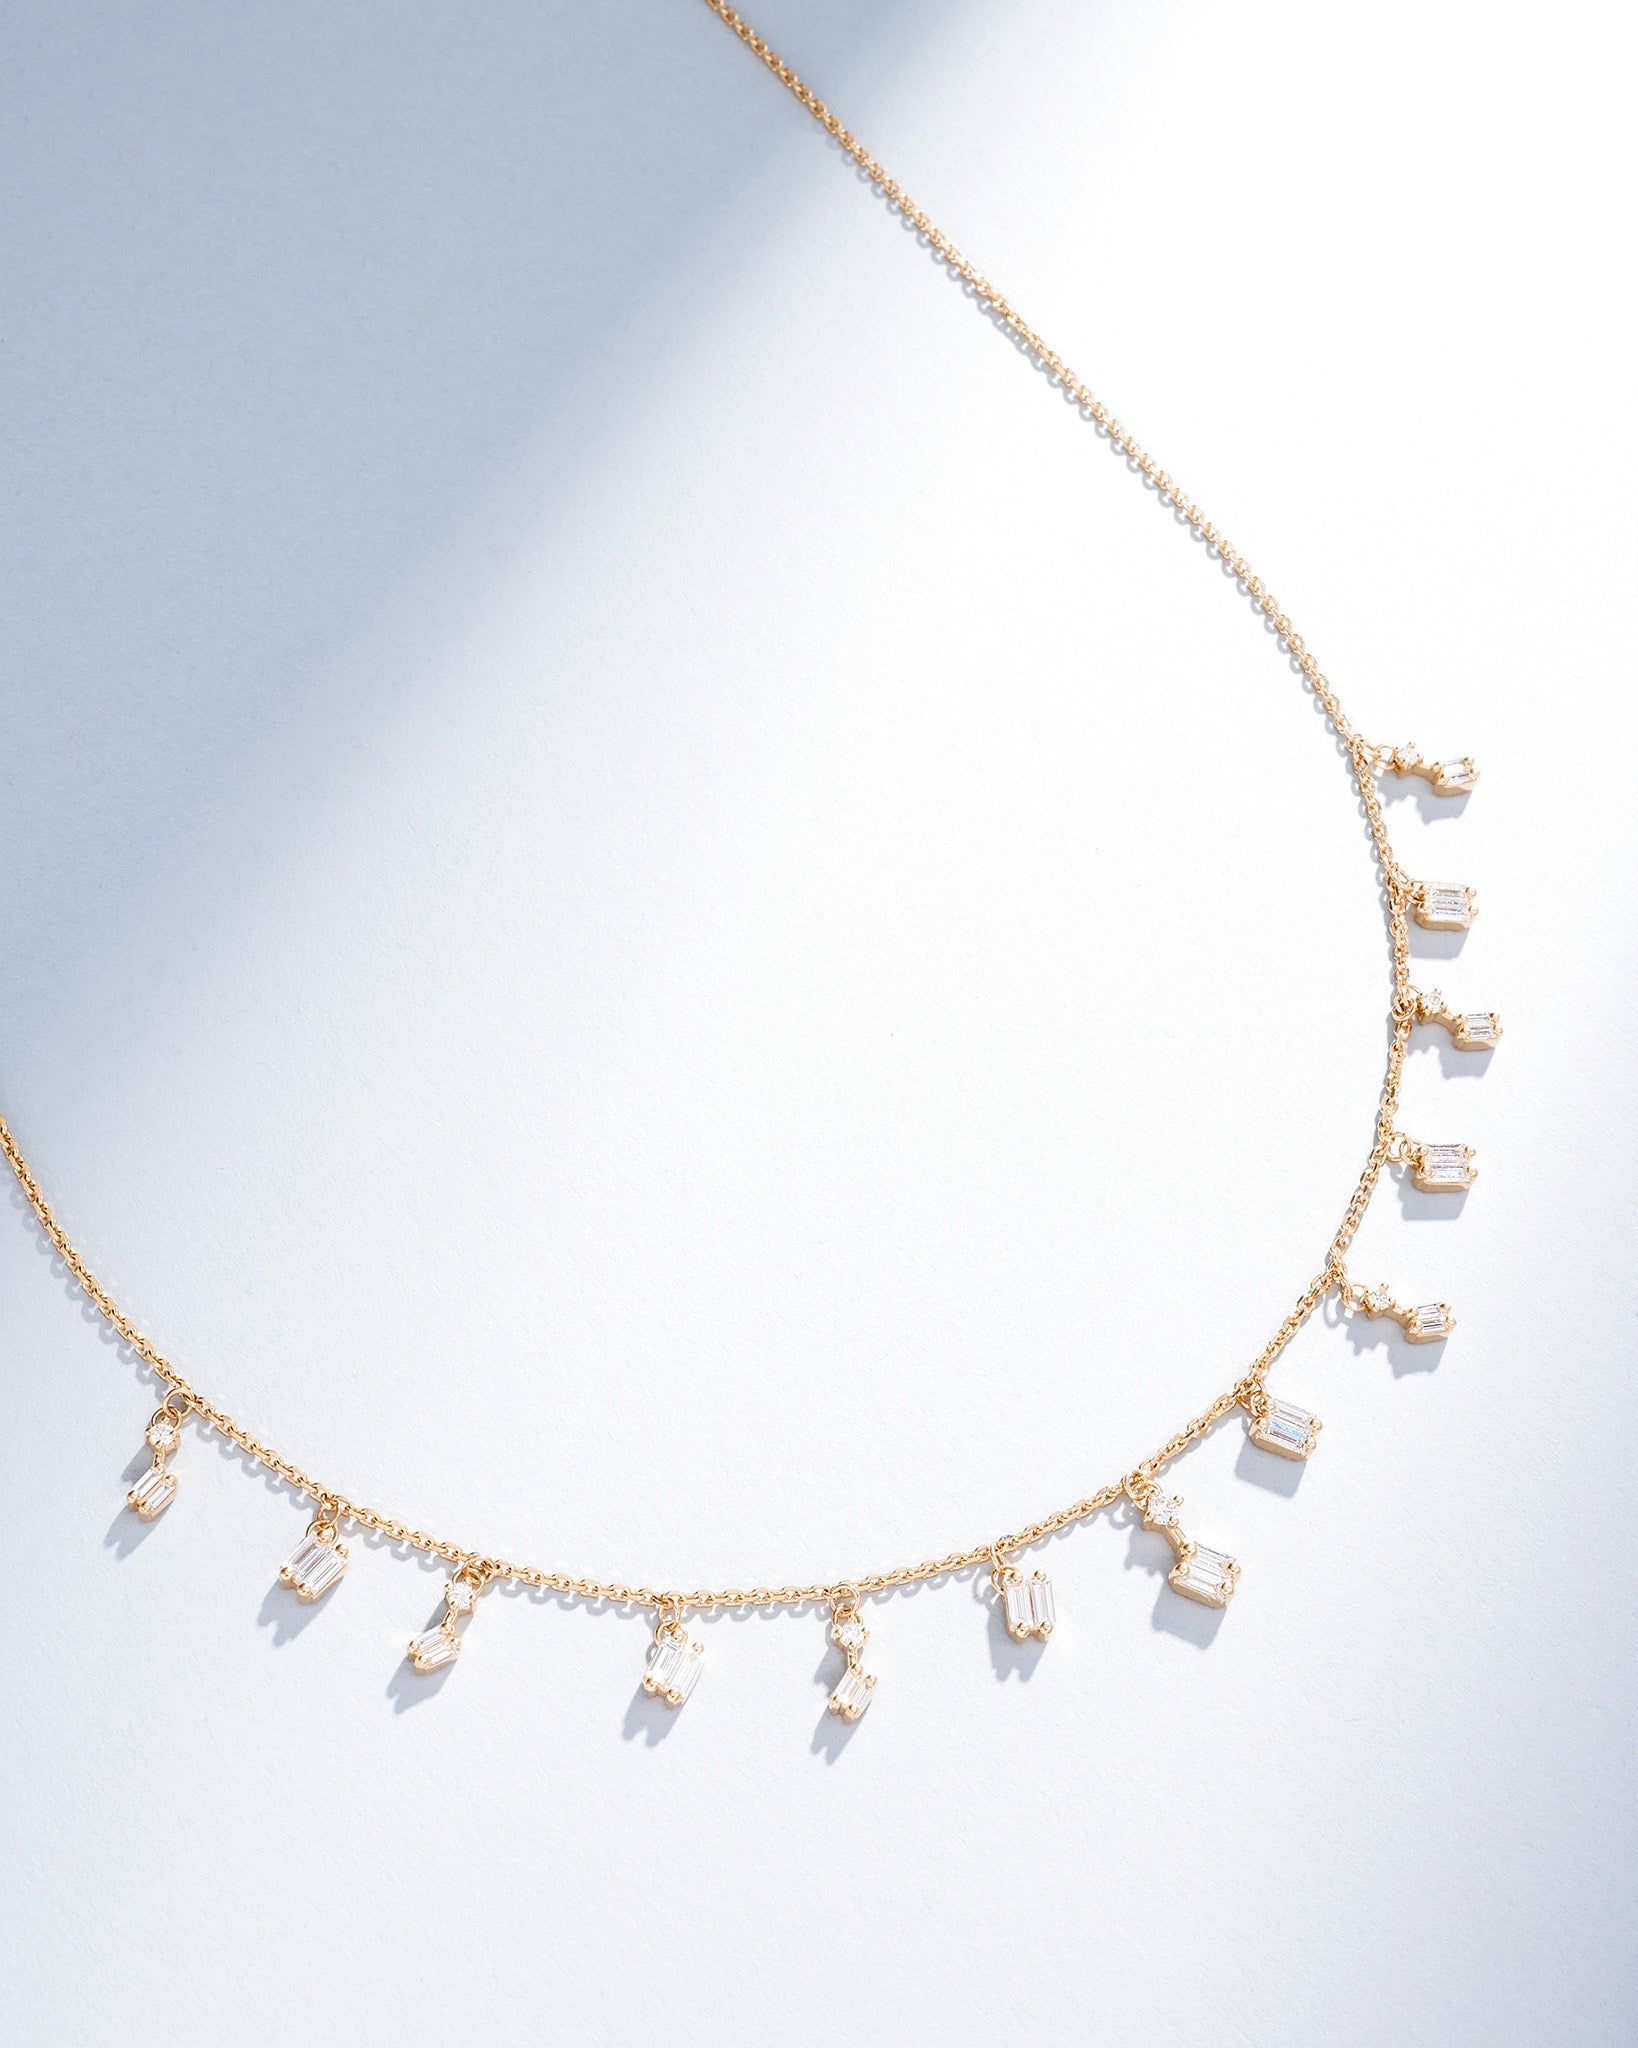 Suzanne Kalan Classic Diamond Cascade Necklace in 18k yellow gold